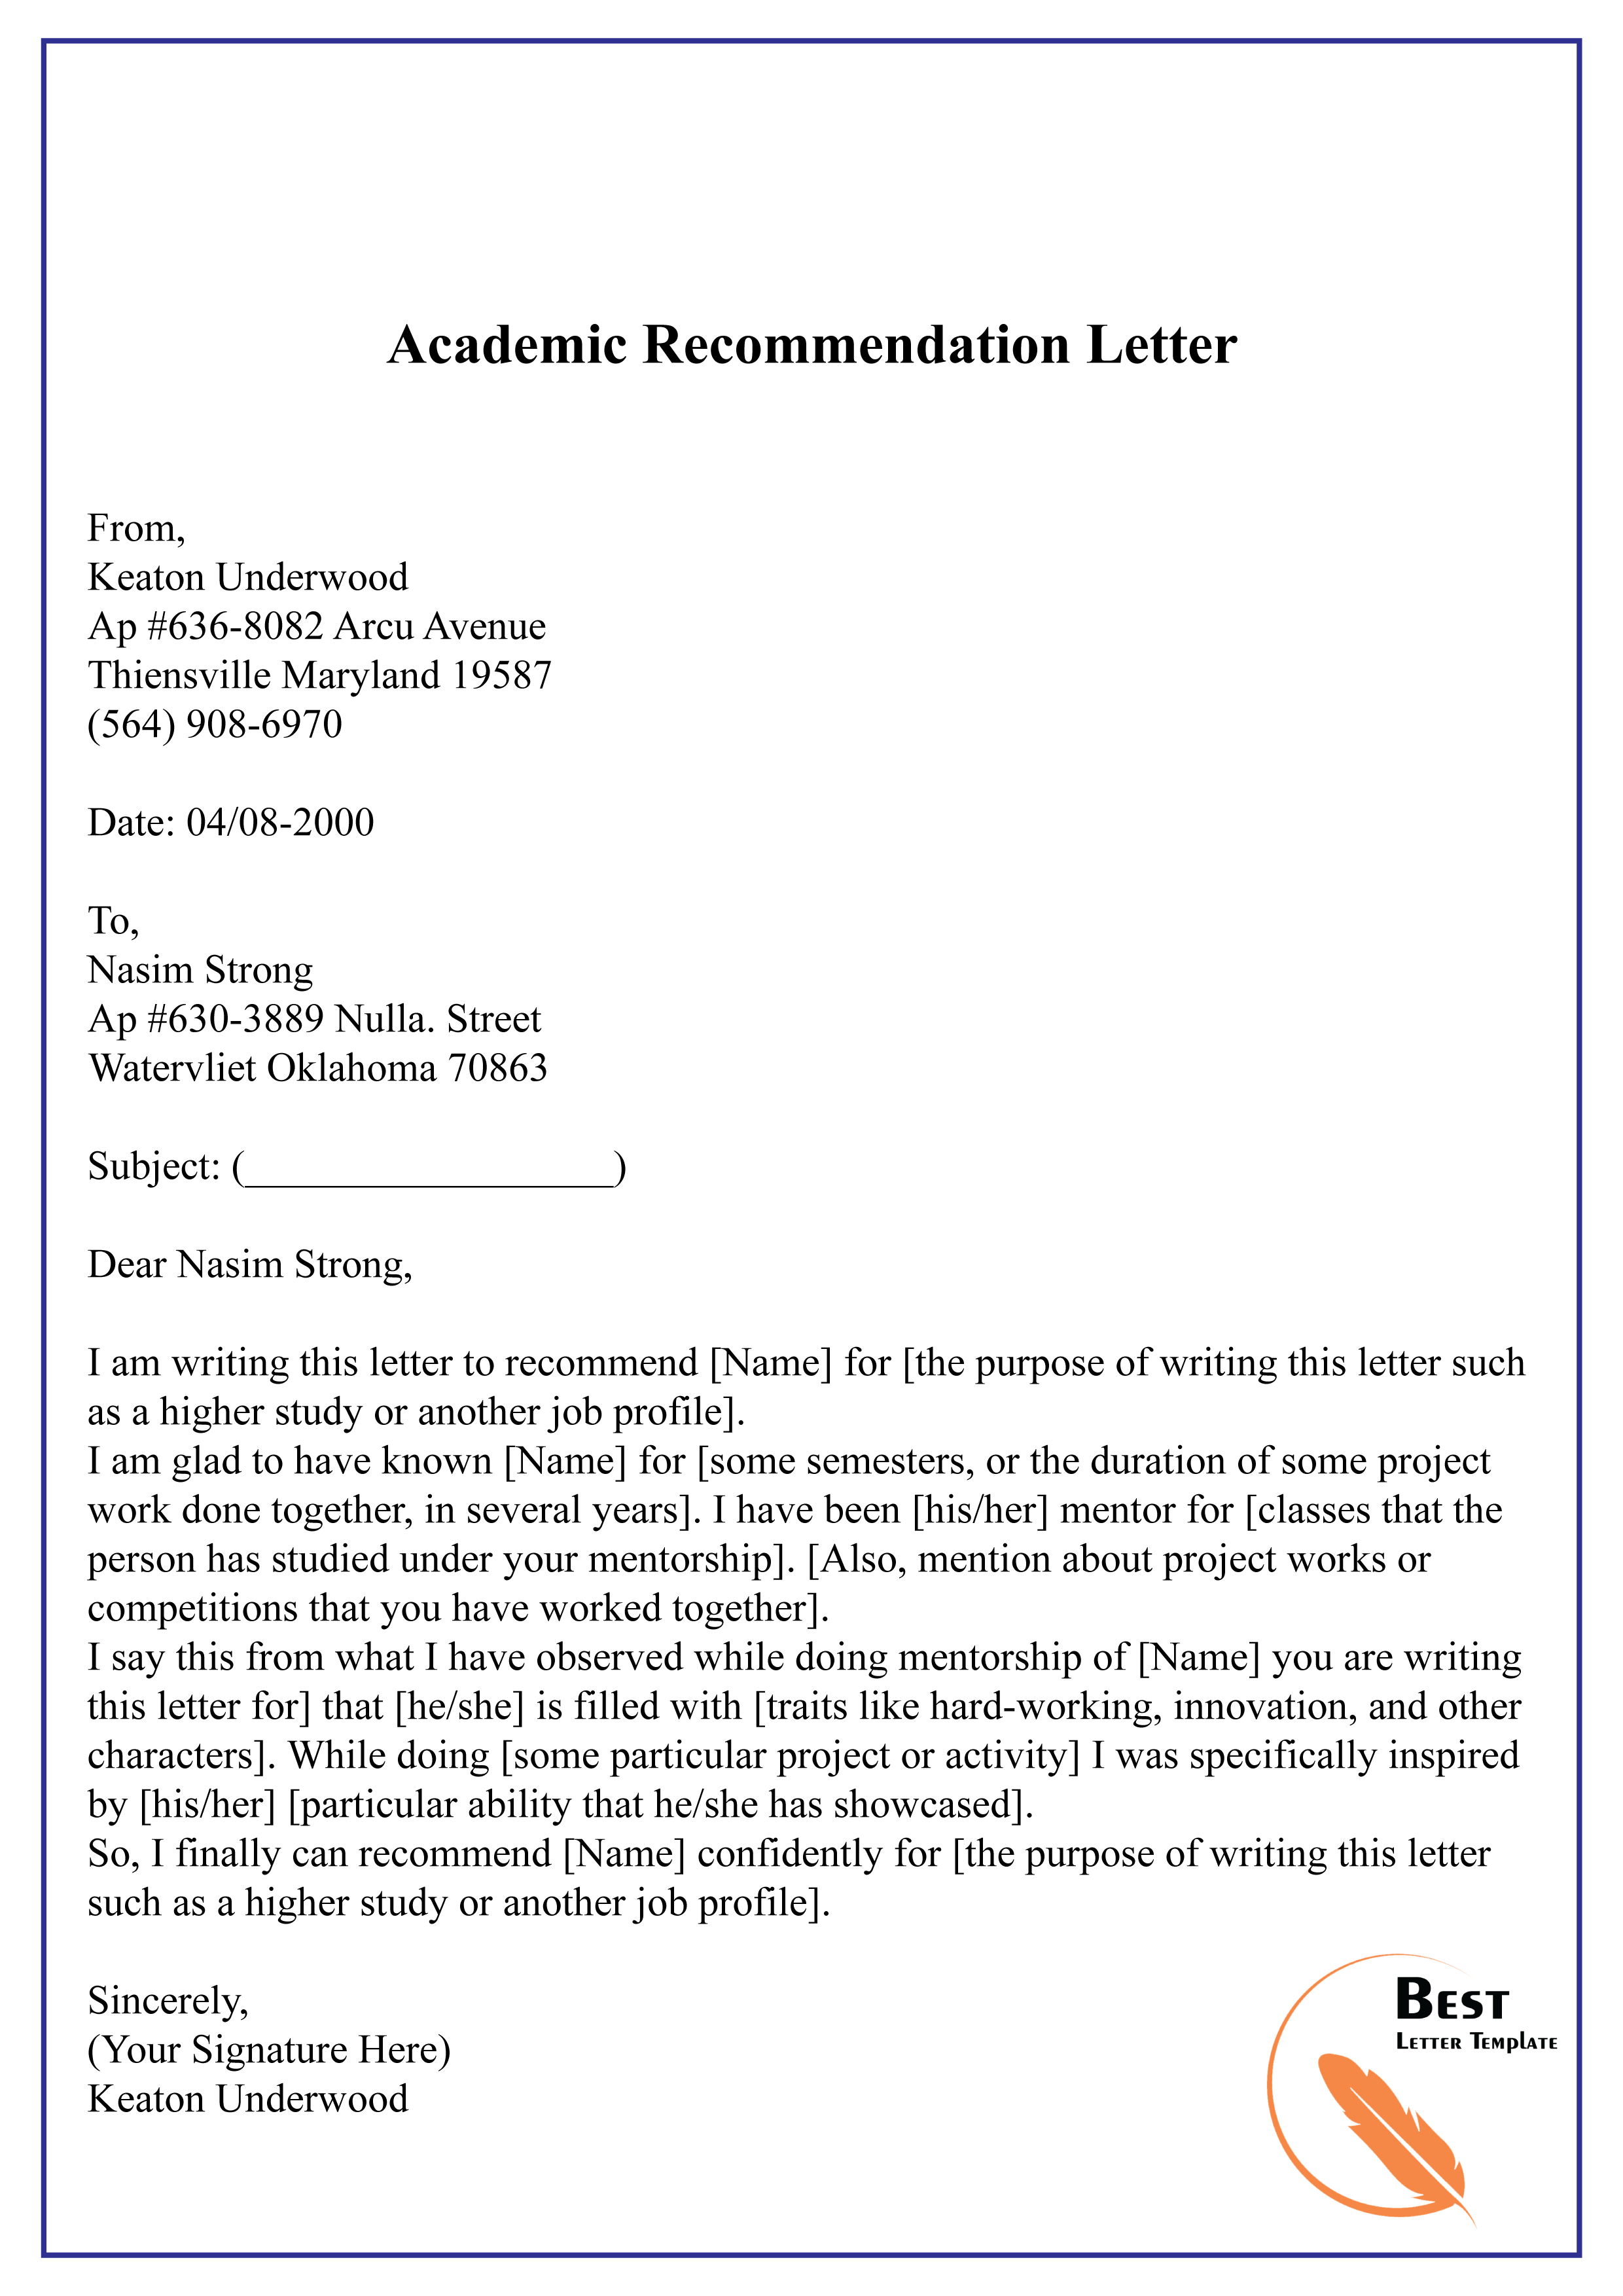 Academic Recommendation Letter Template from bestlettertemplate.com